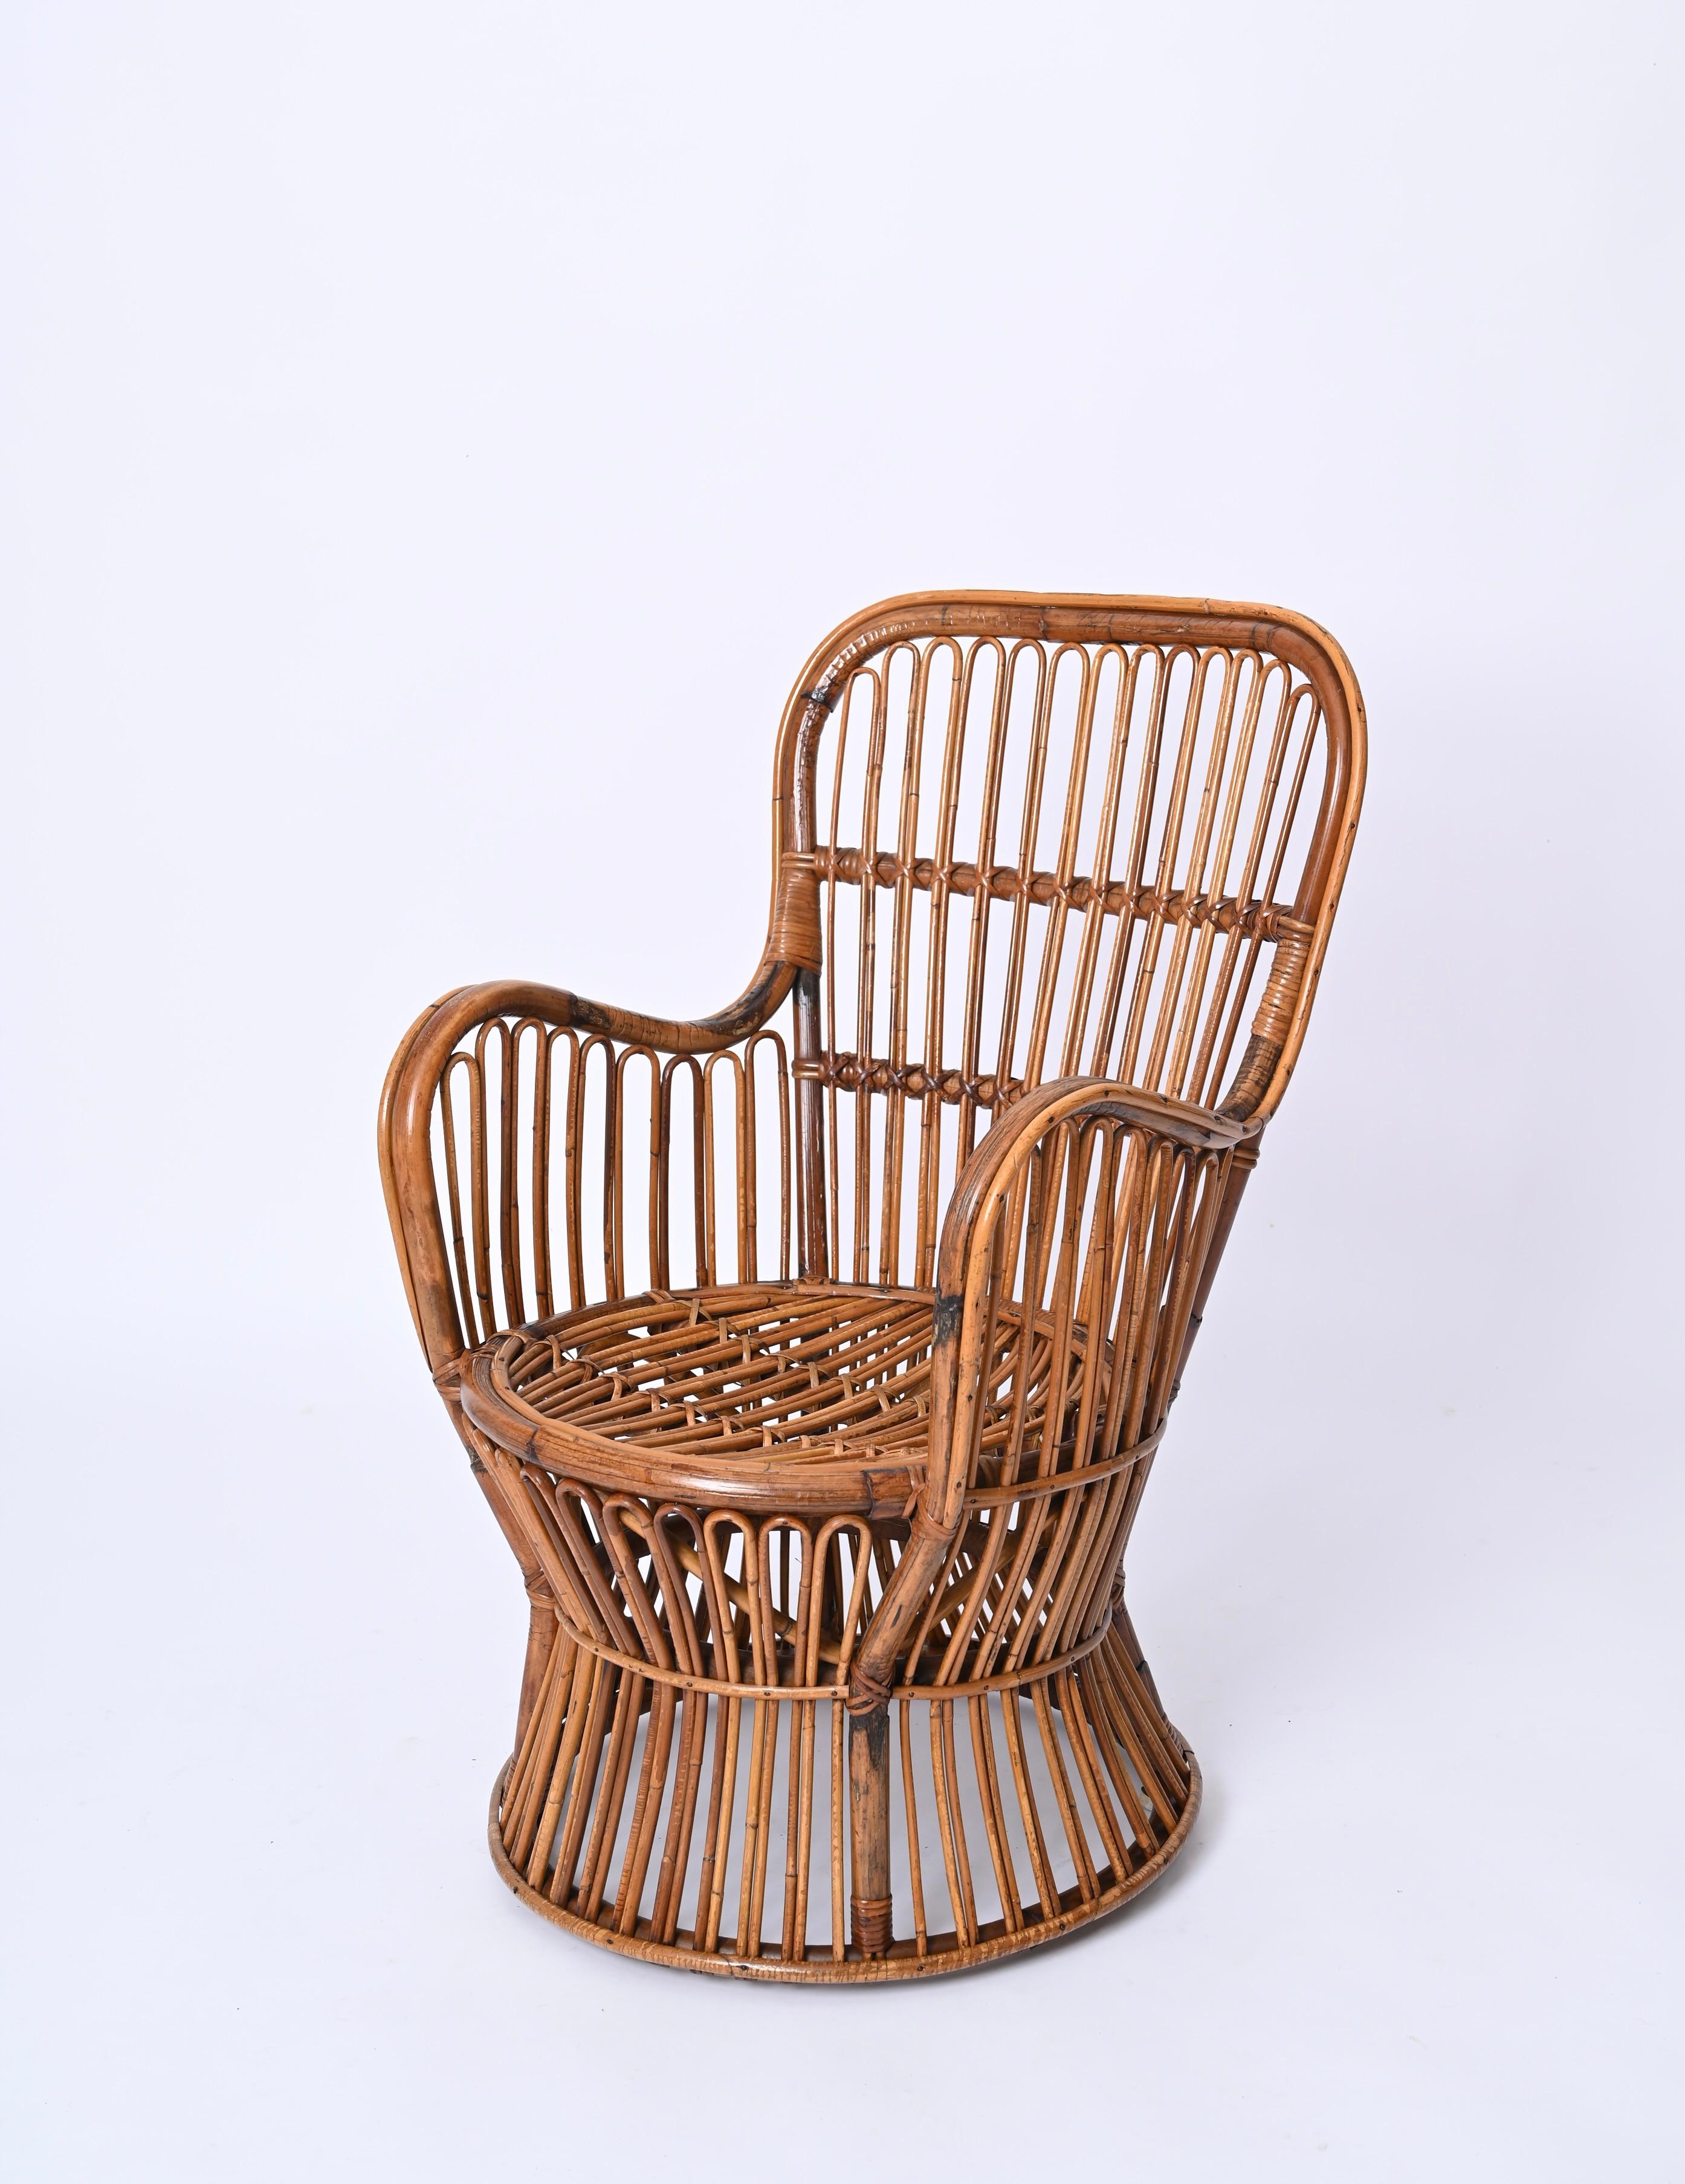 Fantastic midcentury armchair in rattan wicker. This incredible rare piece was produced in Italy during the 1960s by Bonacina.

The craftsmanship of this armchair is exceptional, featuring a stunning hourglass shaped base and a curved armrest.